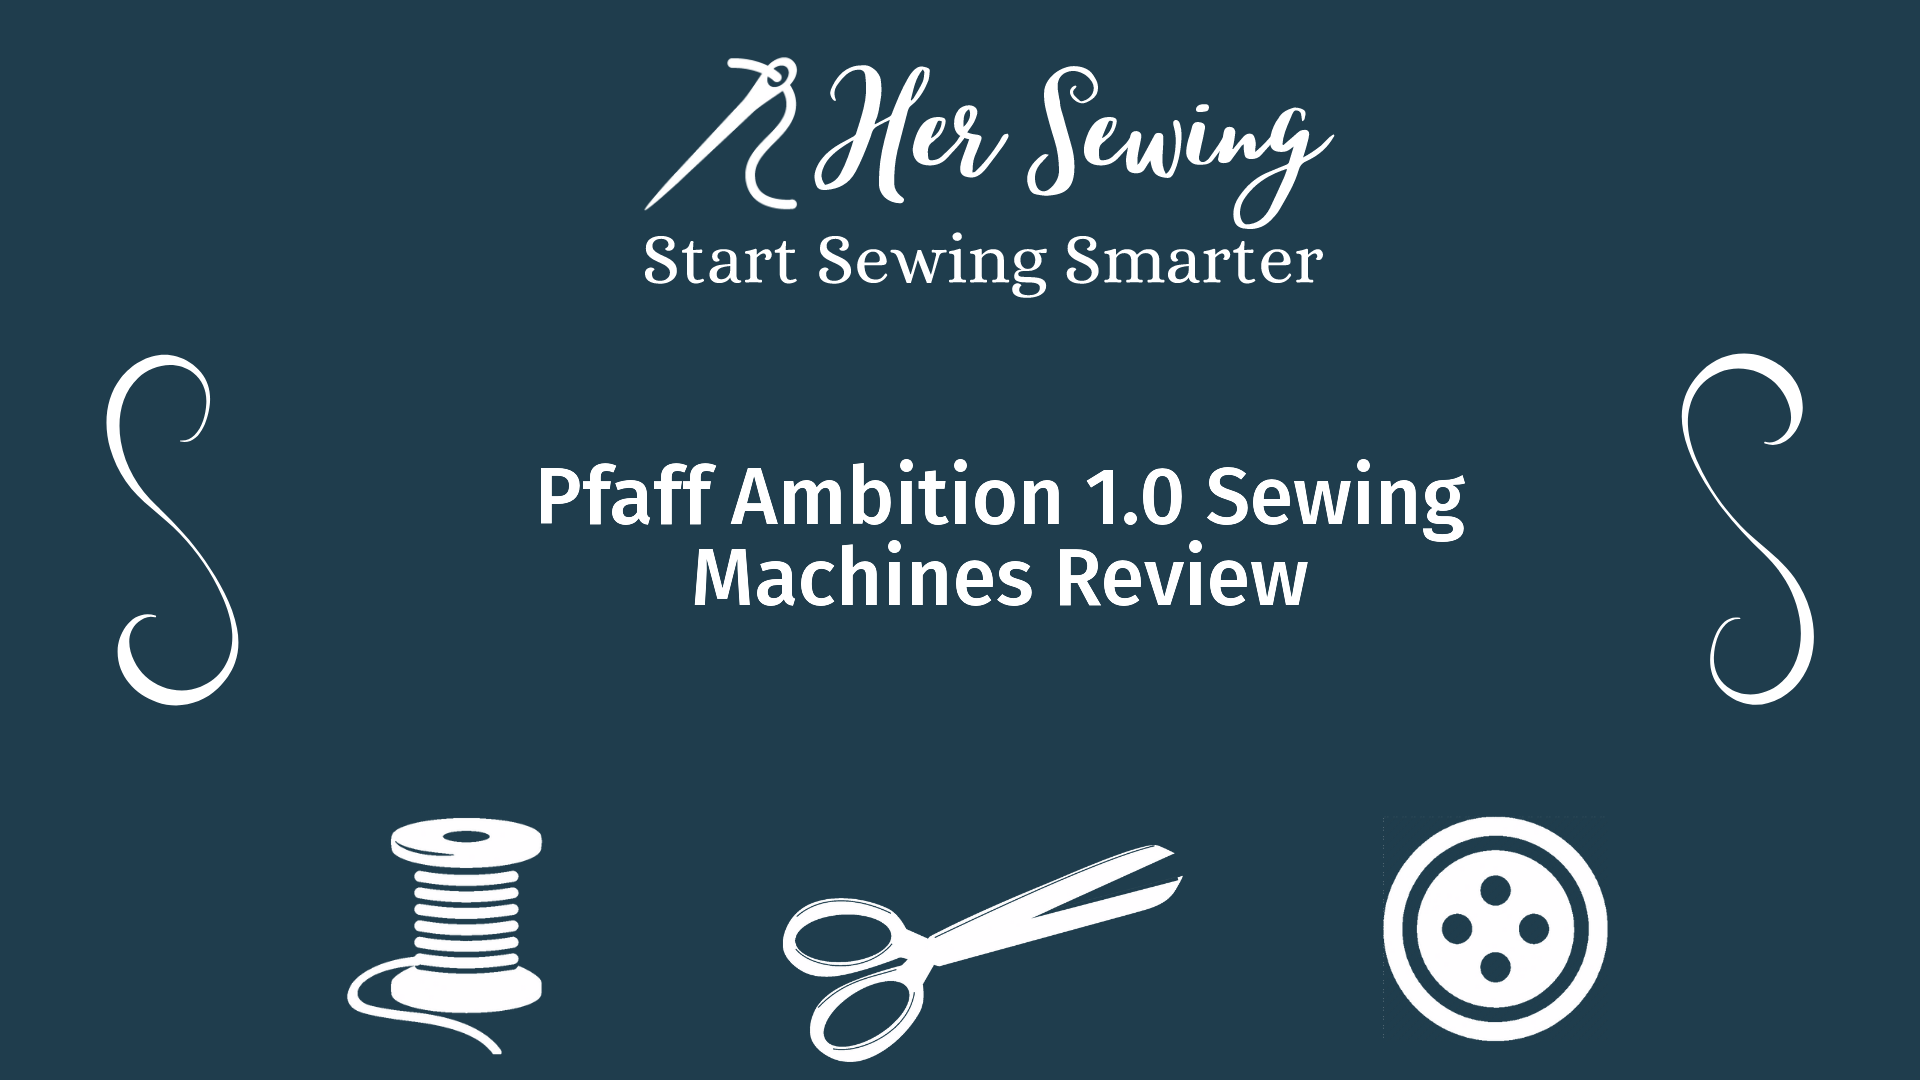 Pfaff Ambition 1.0 Sewing Machines Review